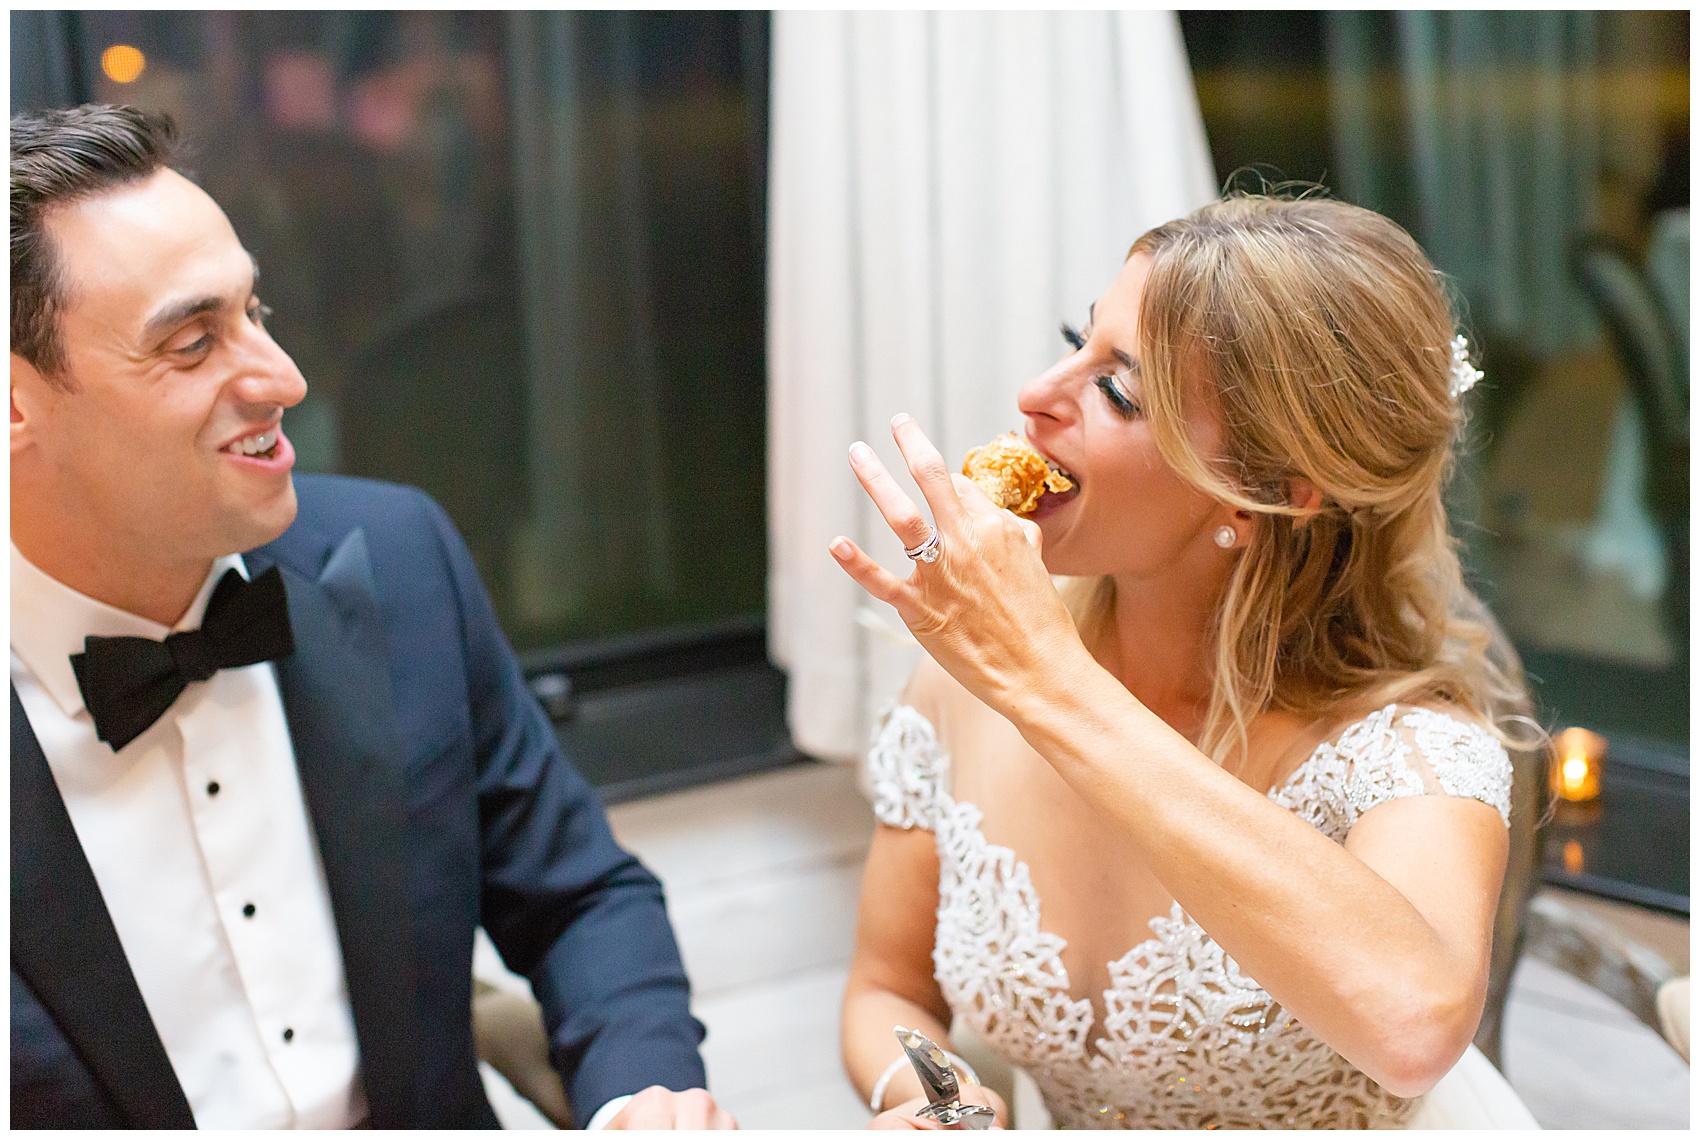 bride eating fried chicken |This is just an example of how I would create the perfect wedding day timeline!